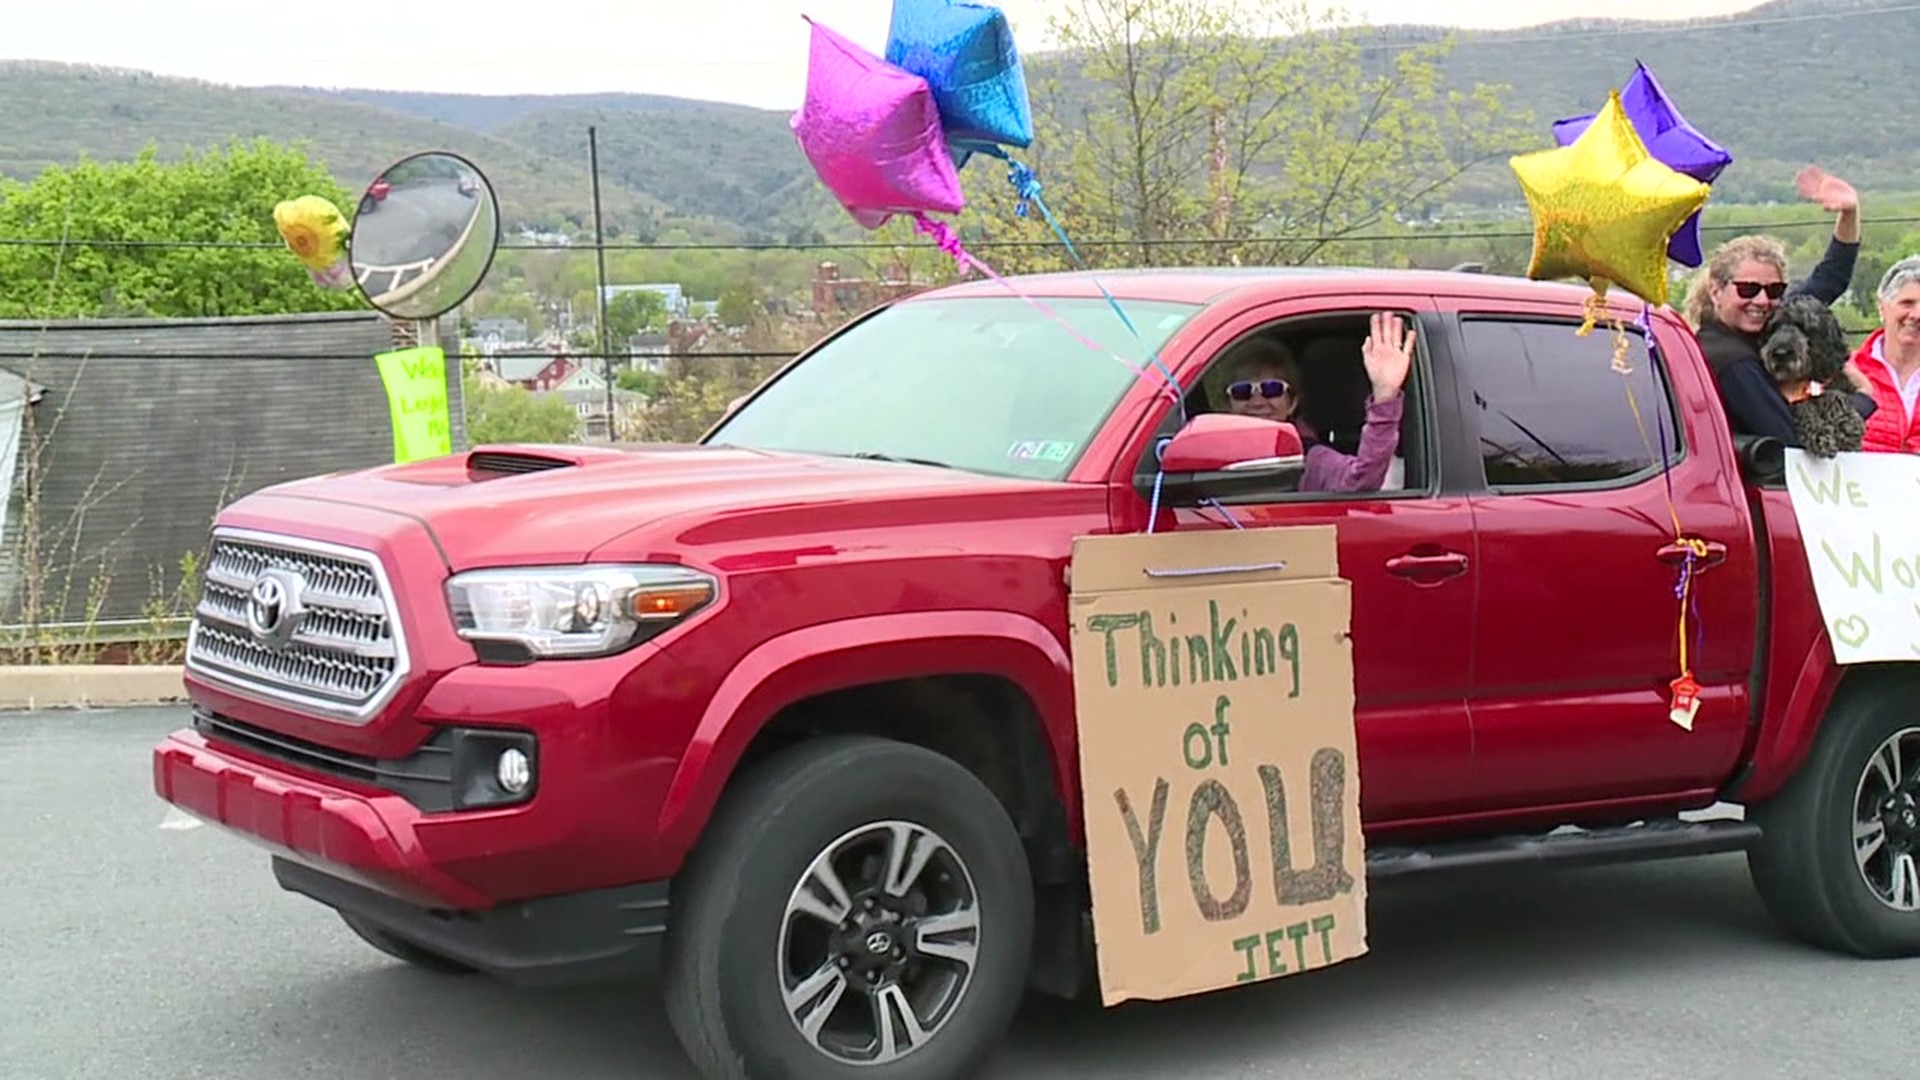 A senior living community in Williamsport hosted a social distancing parade to celebrate mothers.